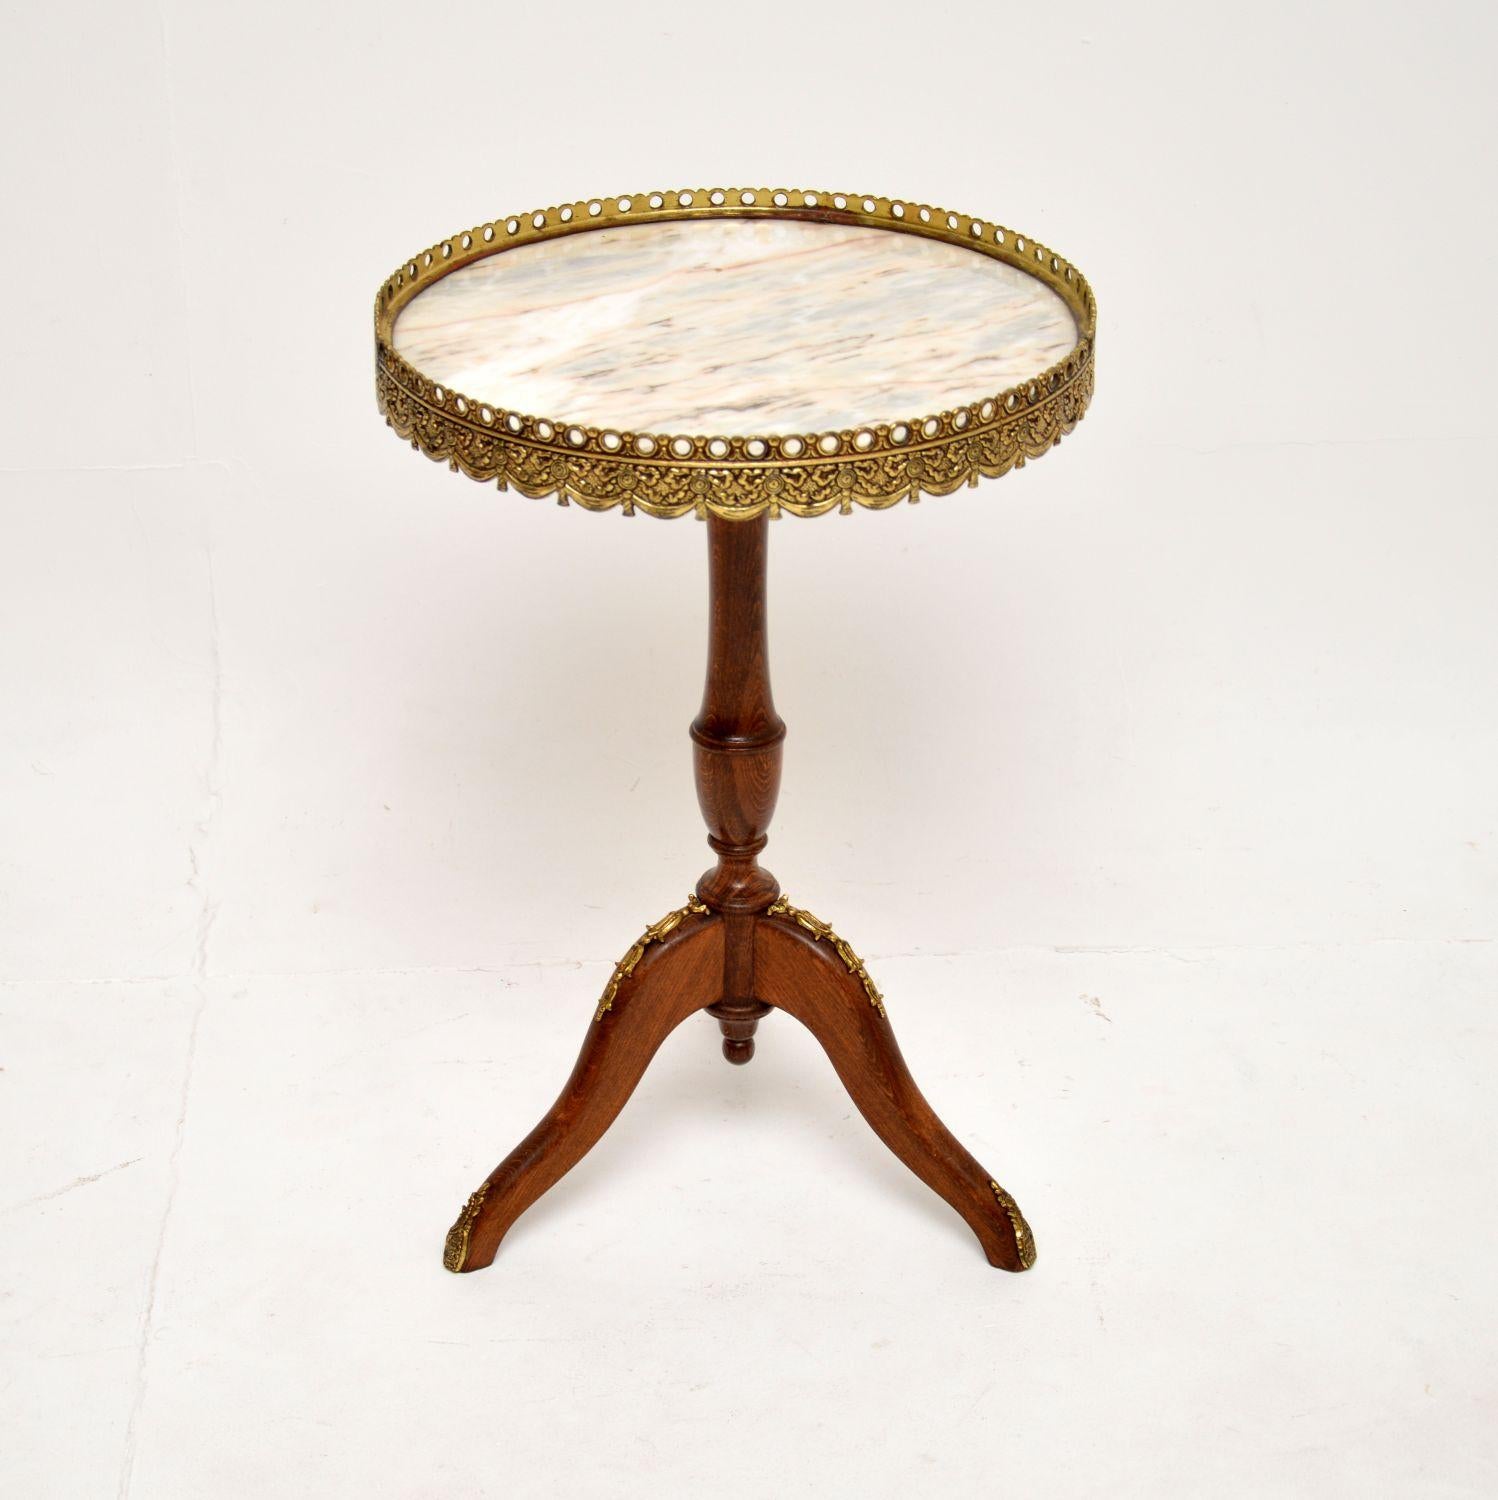 A beautiful and very well made antique French marble top wine table, dating from around the 1930’s.

This is of superb quality, it is very sturdy and is a useful size. The solid wood frame has high quality ormolu mounts and a gorgeous pierced ormolu